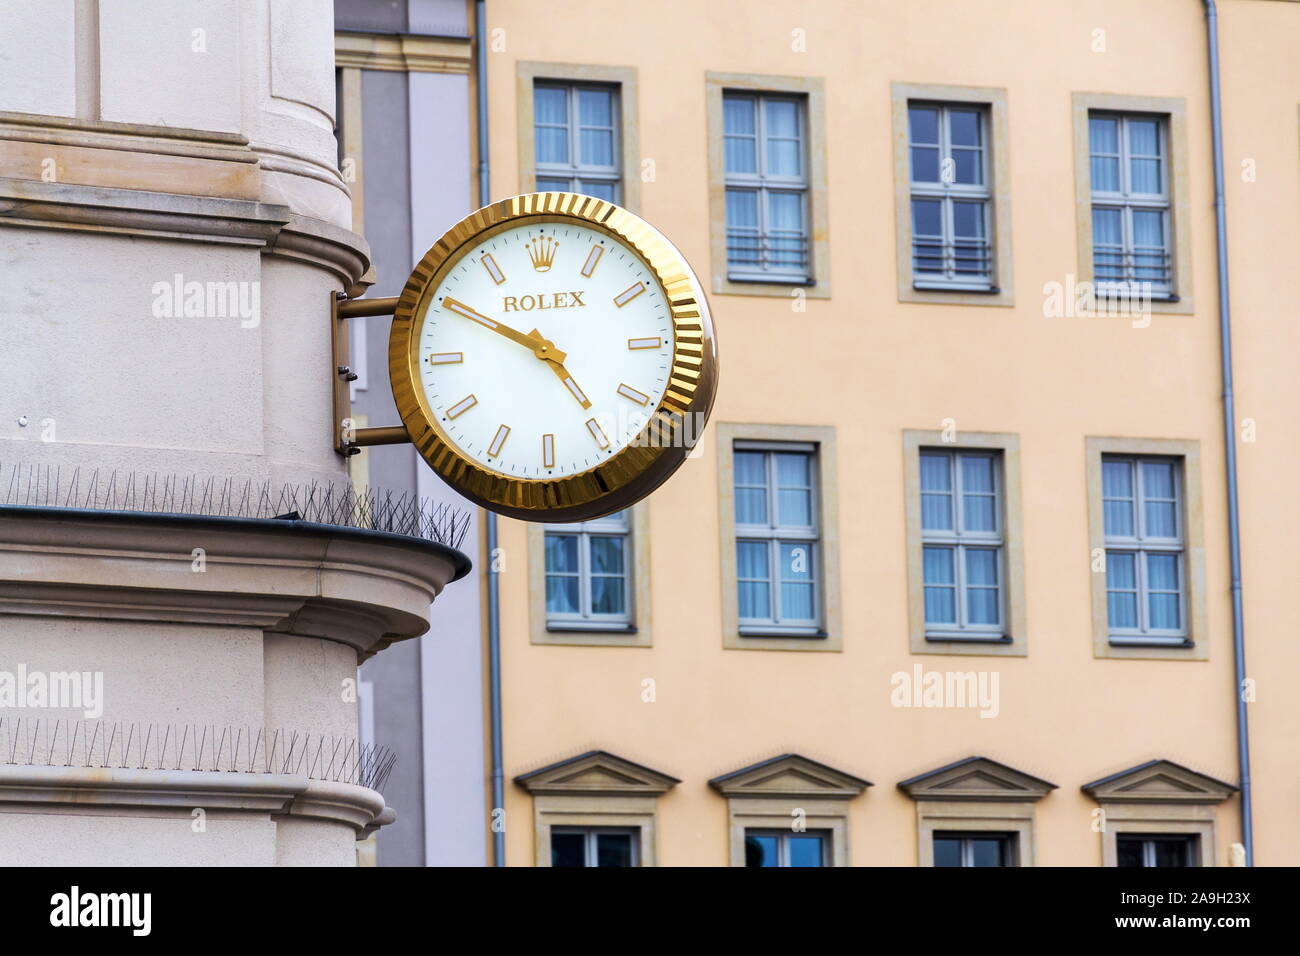 DRESDEN, GERMANY - APRIL 1 2018: Rolex Swiss luxury watch company logo on golden wall clock over the shop on April 1, 2018 in Dresden, Germany. Stock Photo